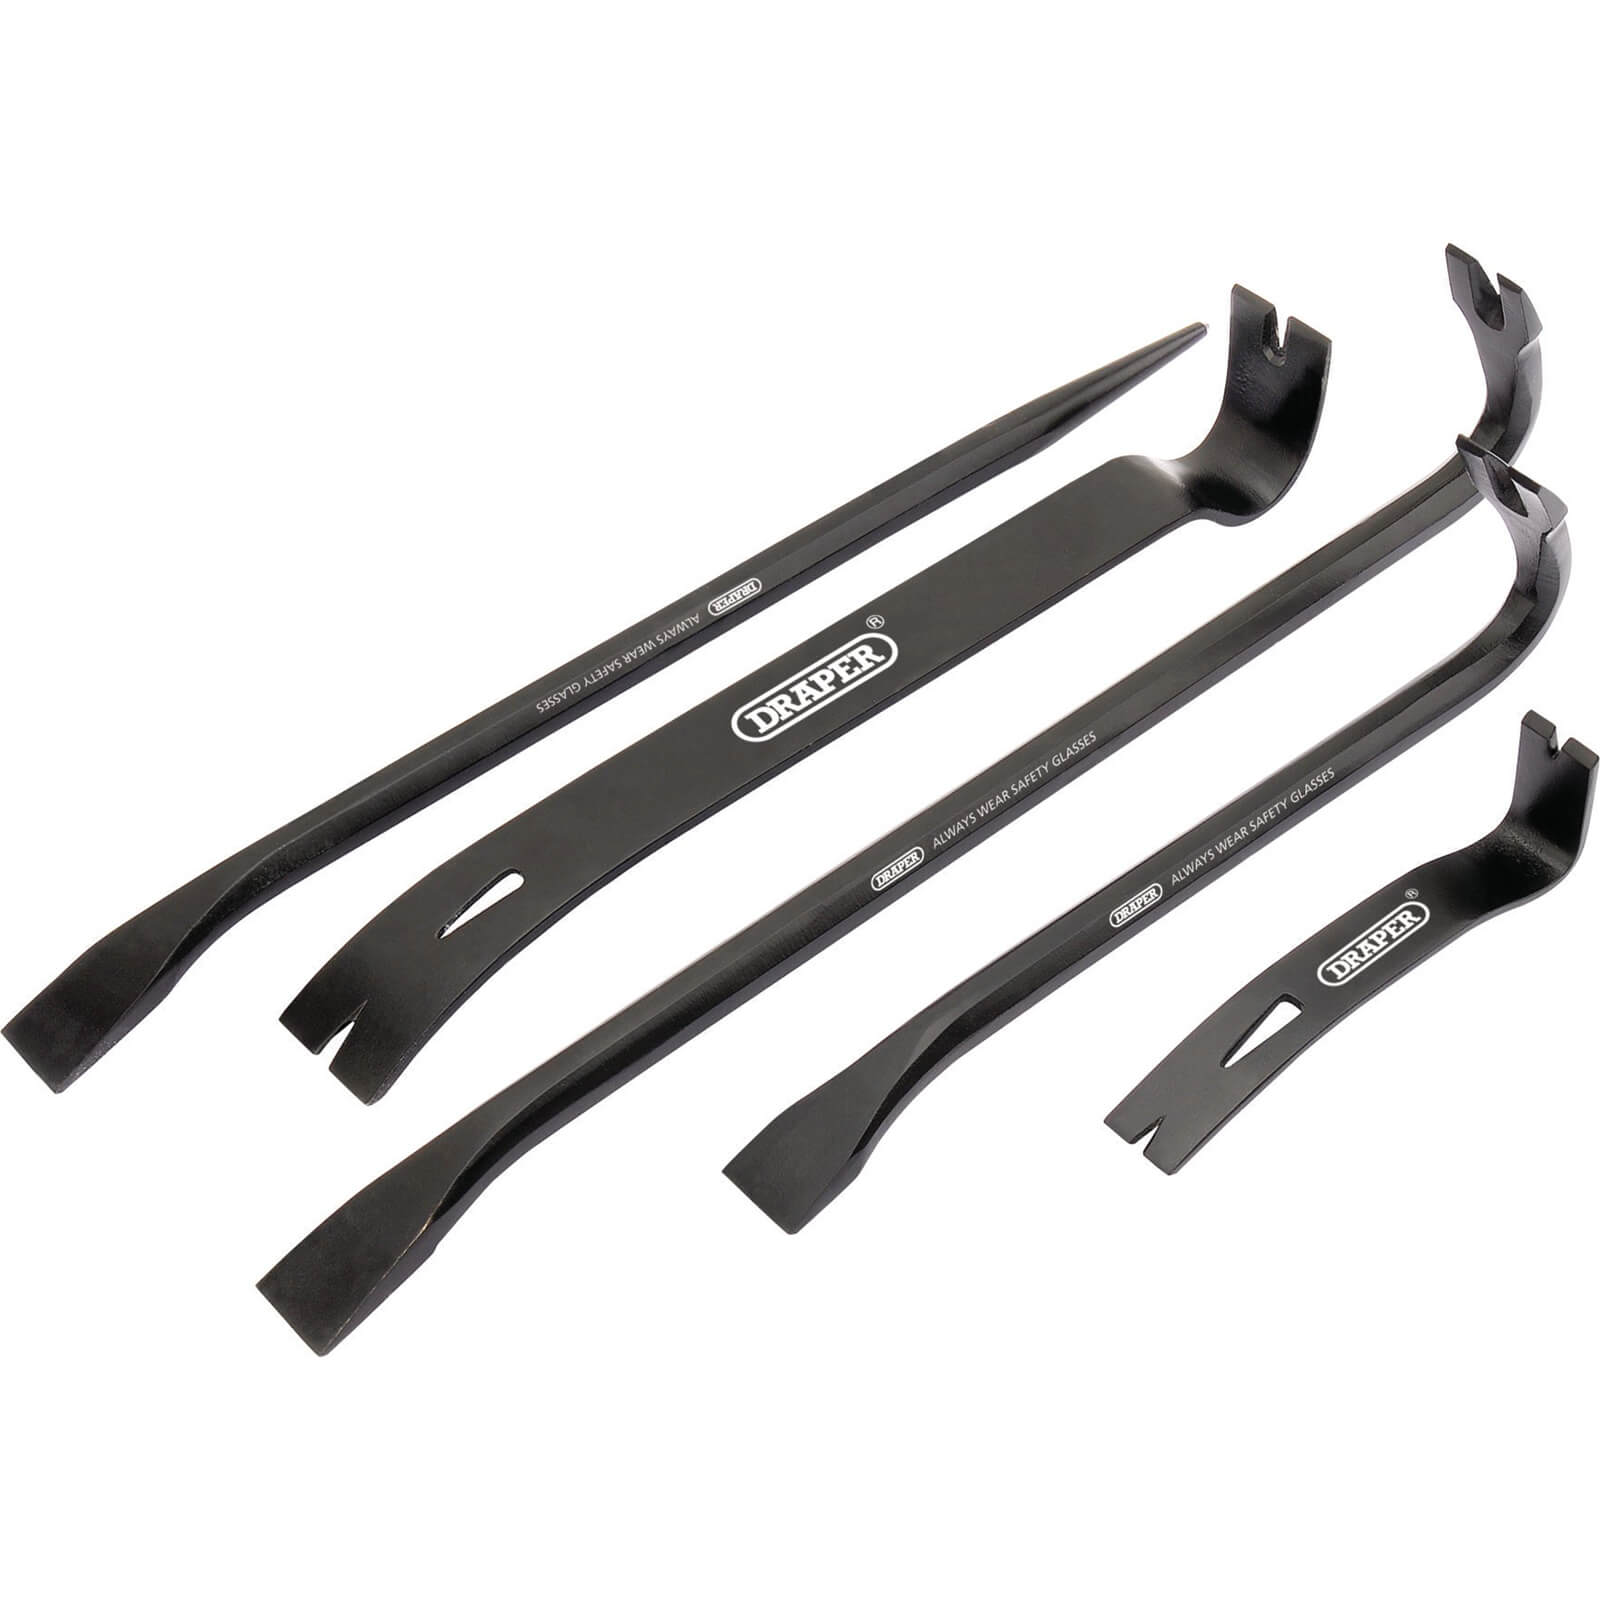 Image of Draper 5 Piece Pry and Wrecking Bar Set